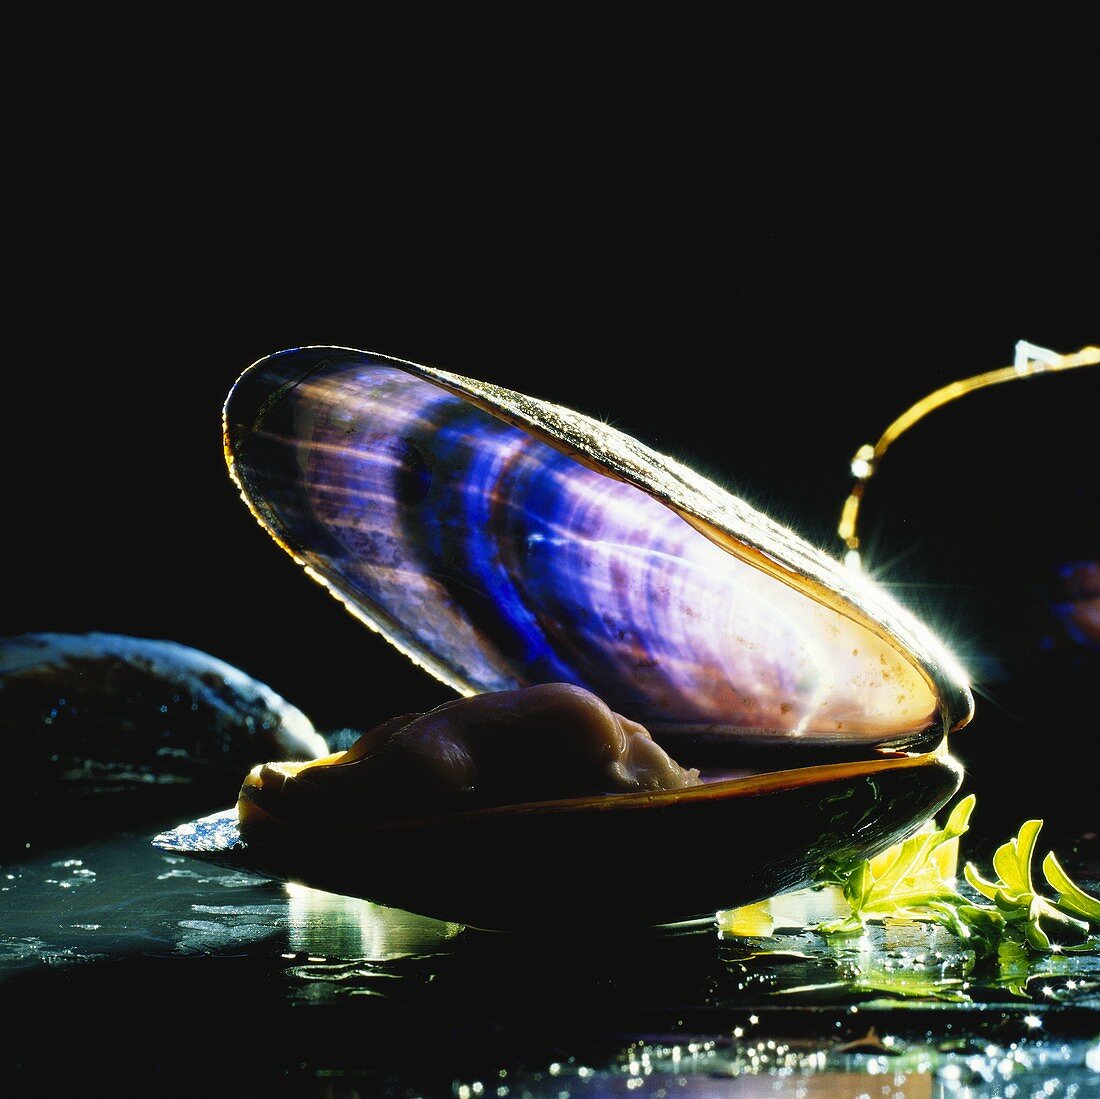 Opened mussel